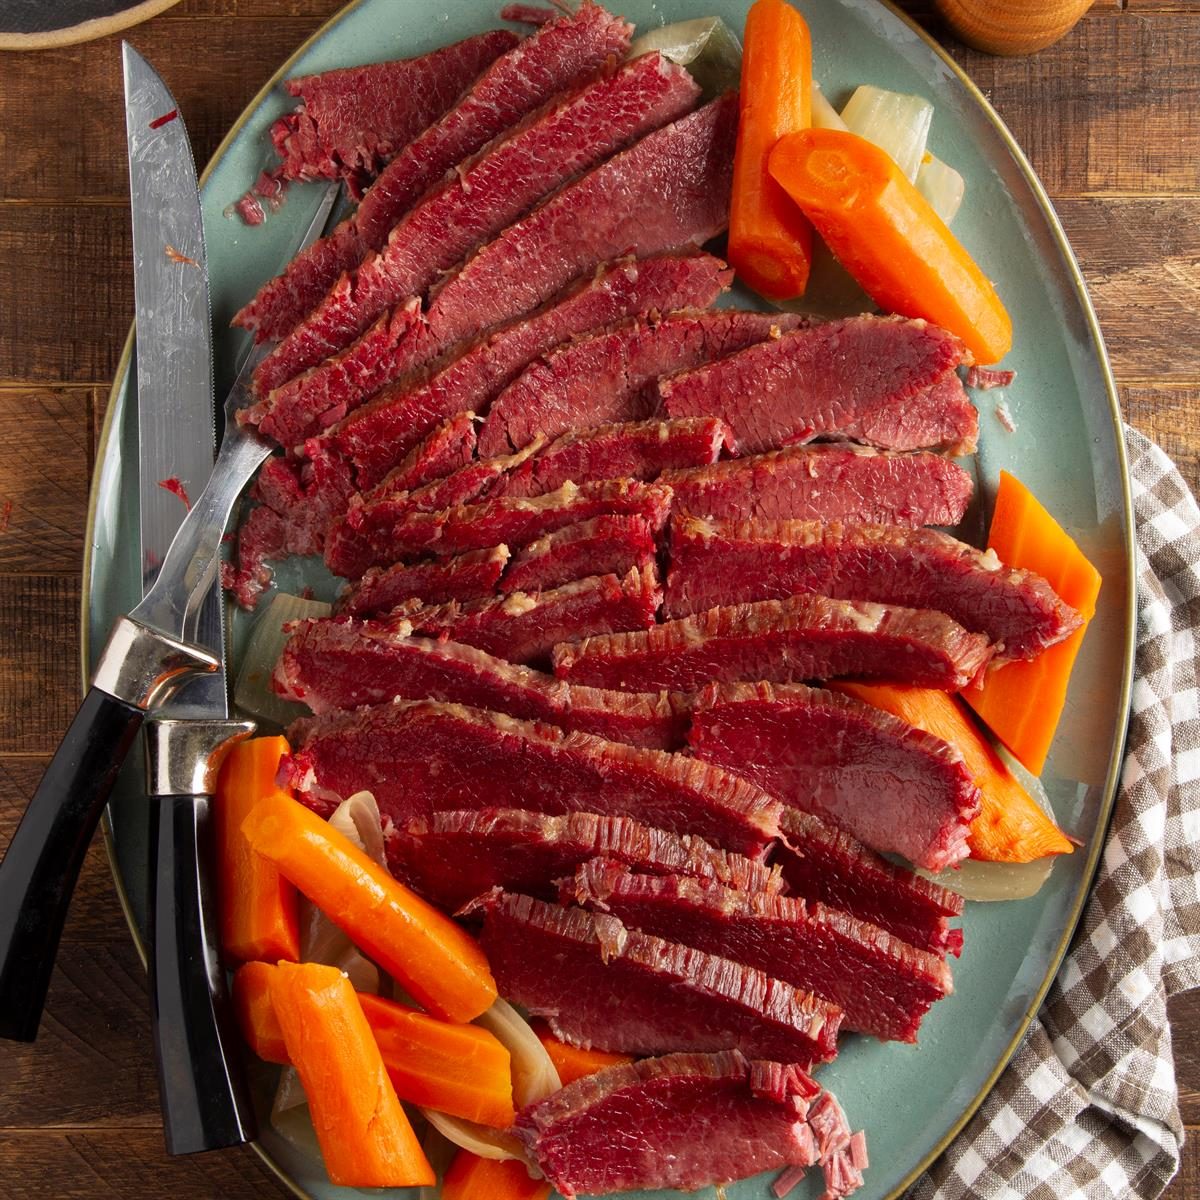 Braised Corned Beef Recipe: How to Make It